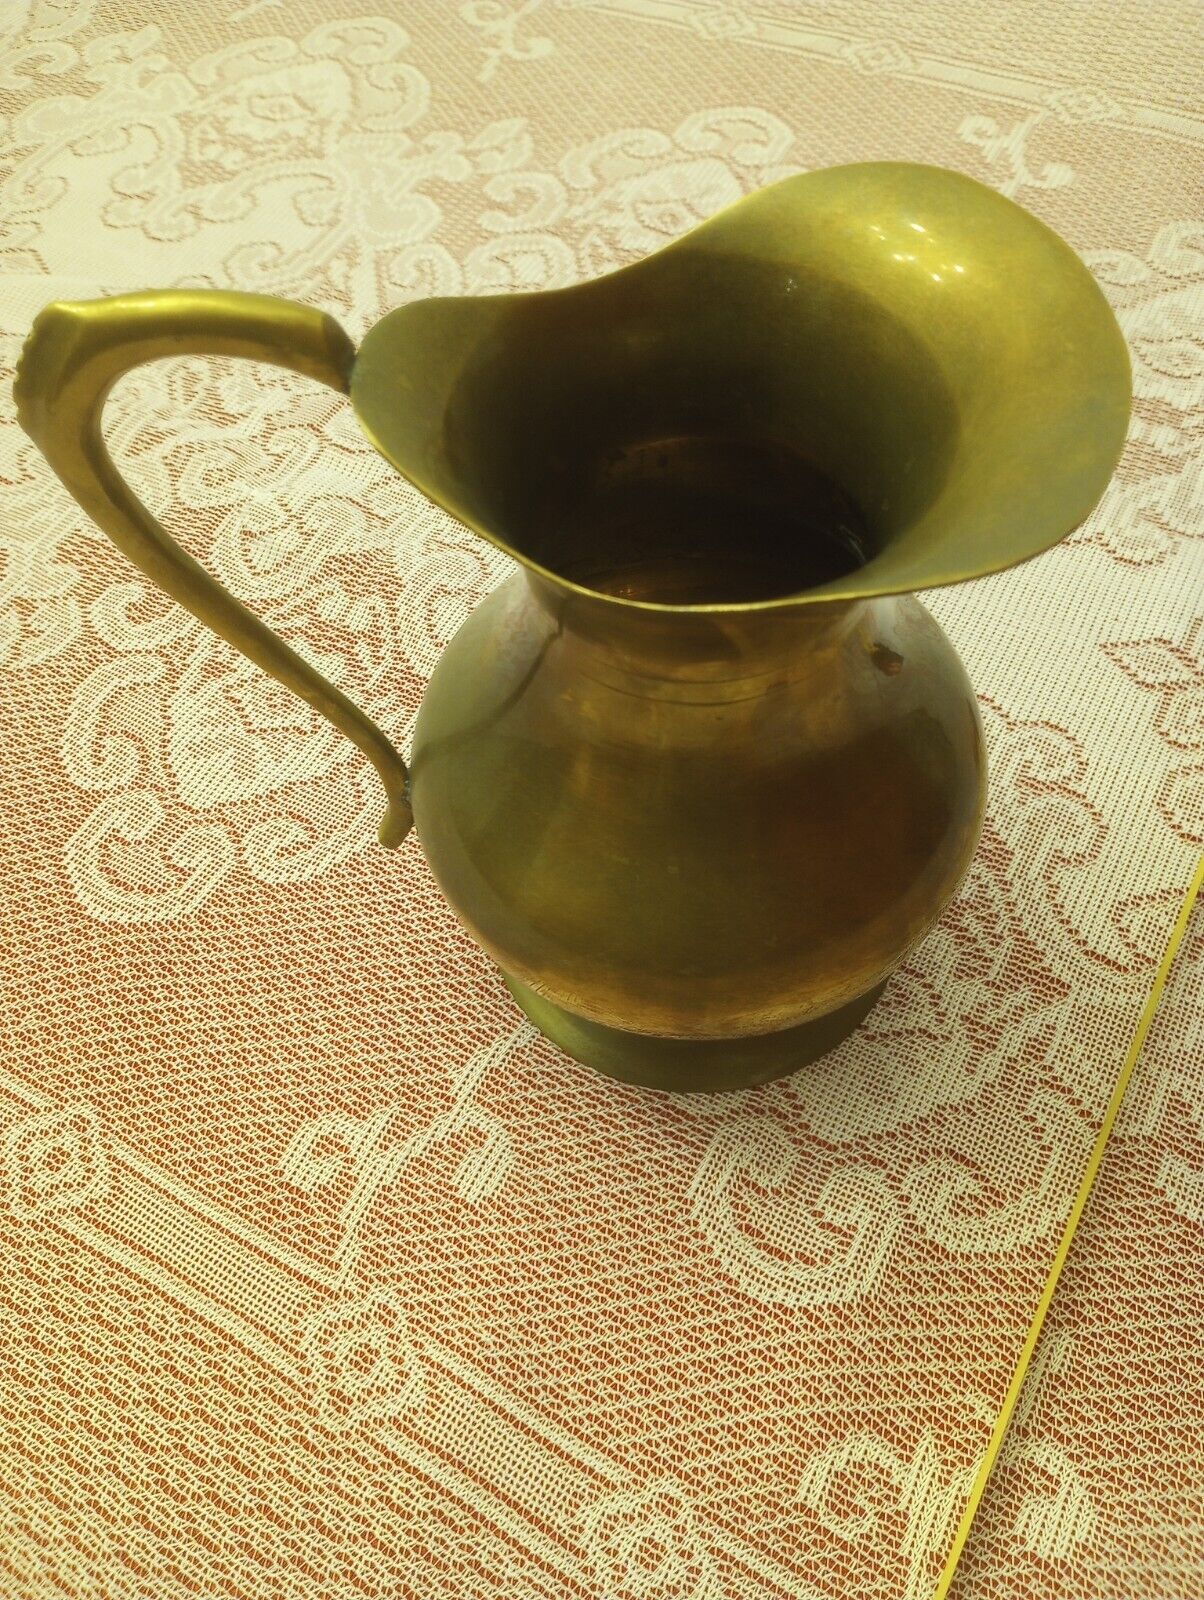 VINTAGE SOLID BRASS PITCHER 8” MADE IN INDIA 